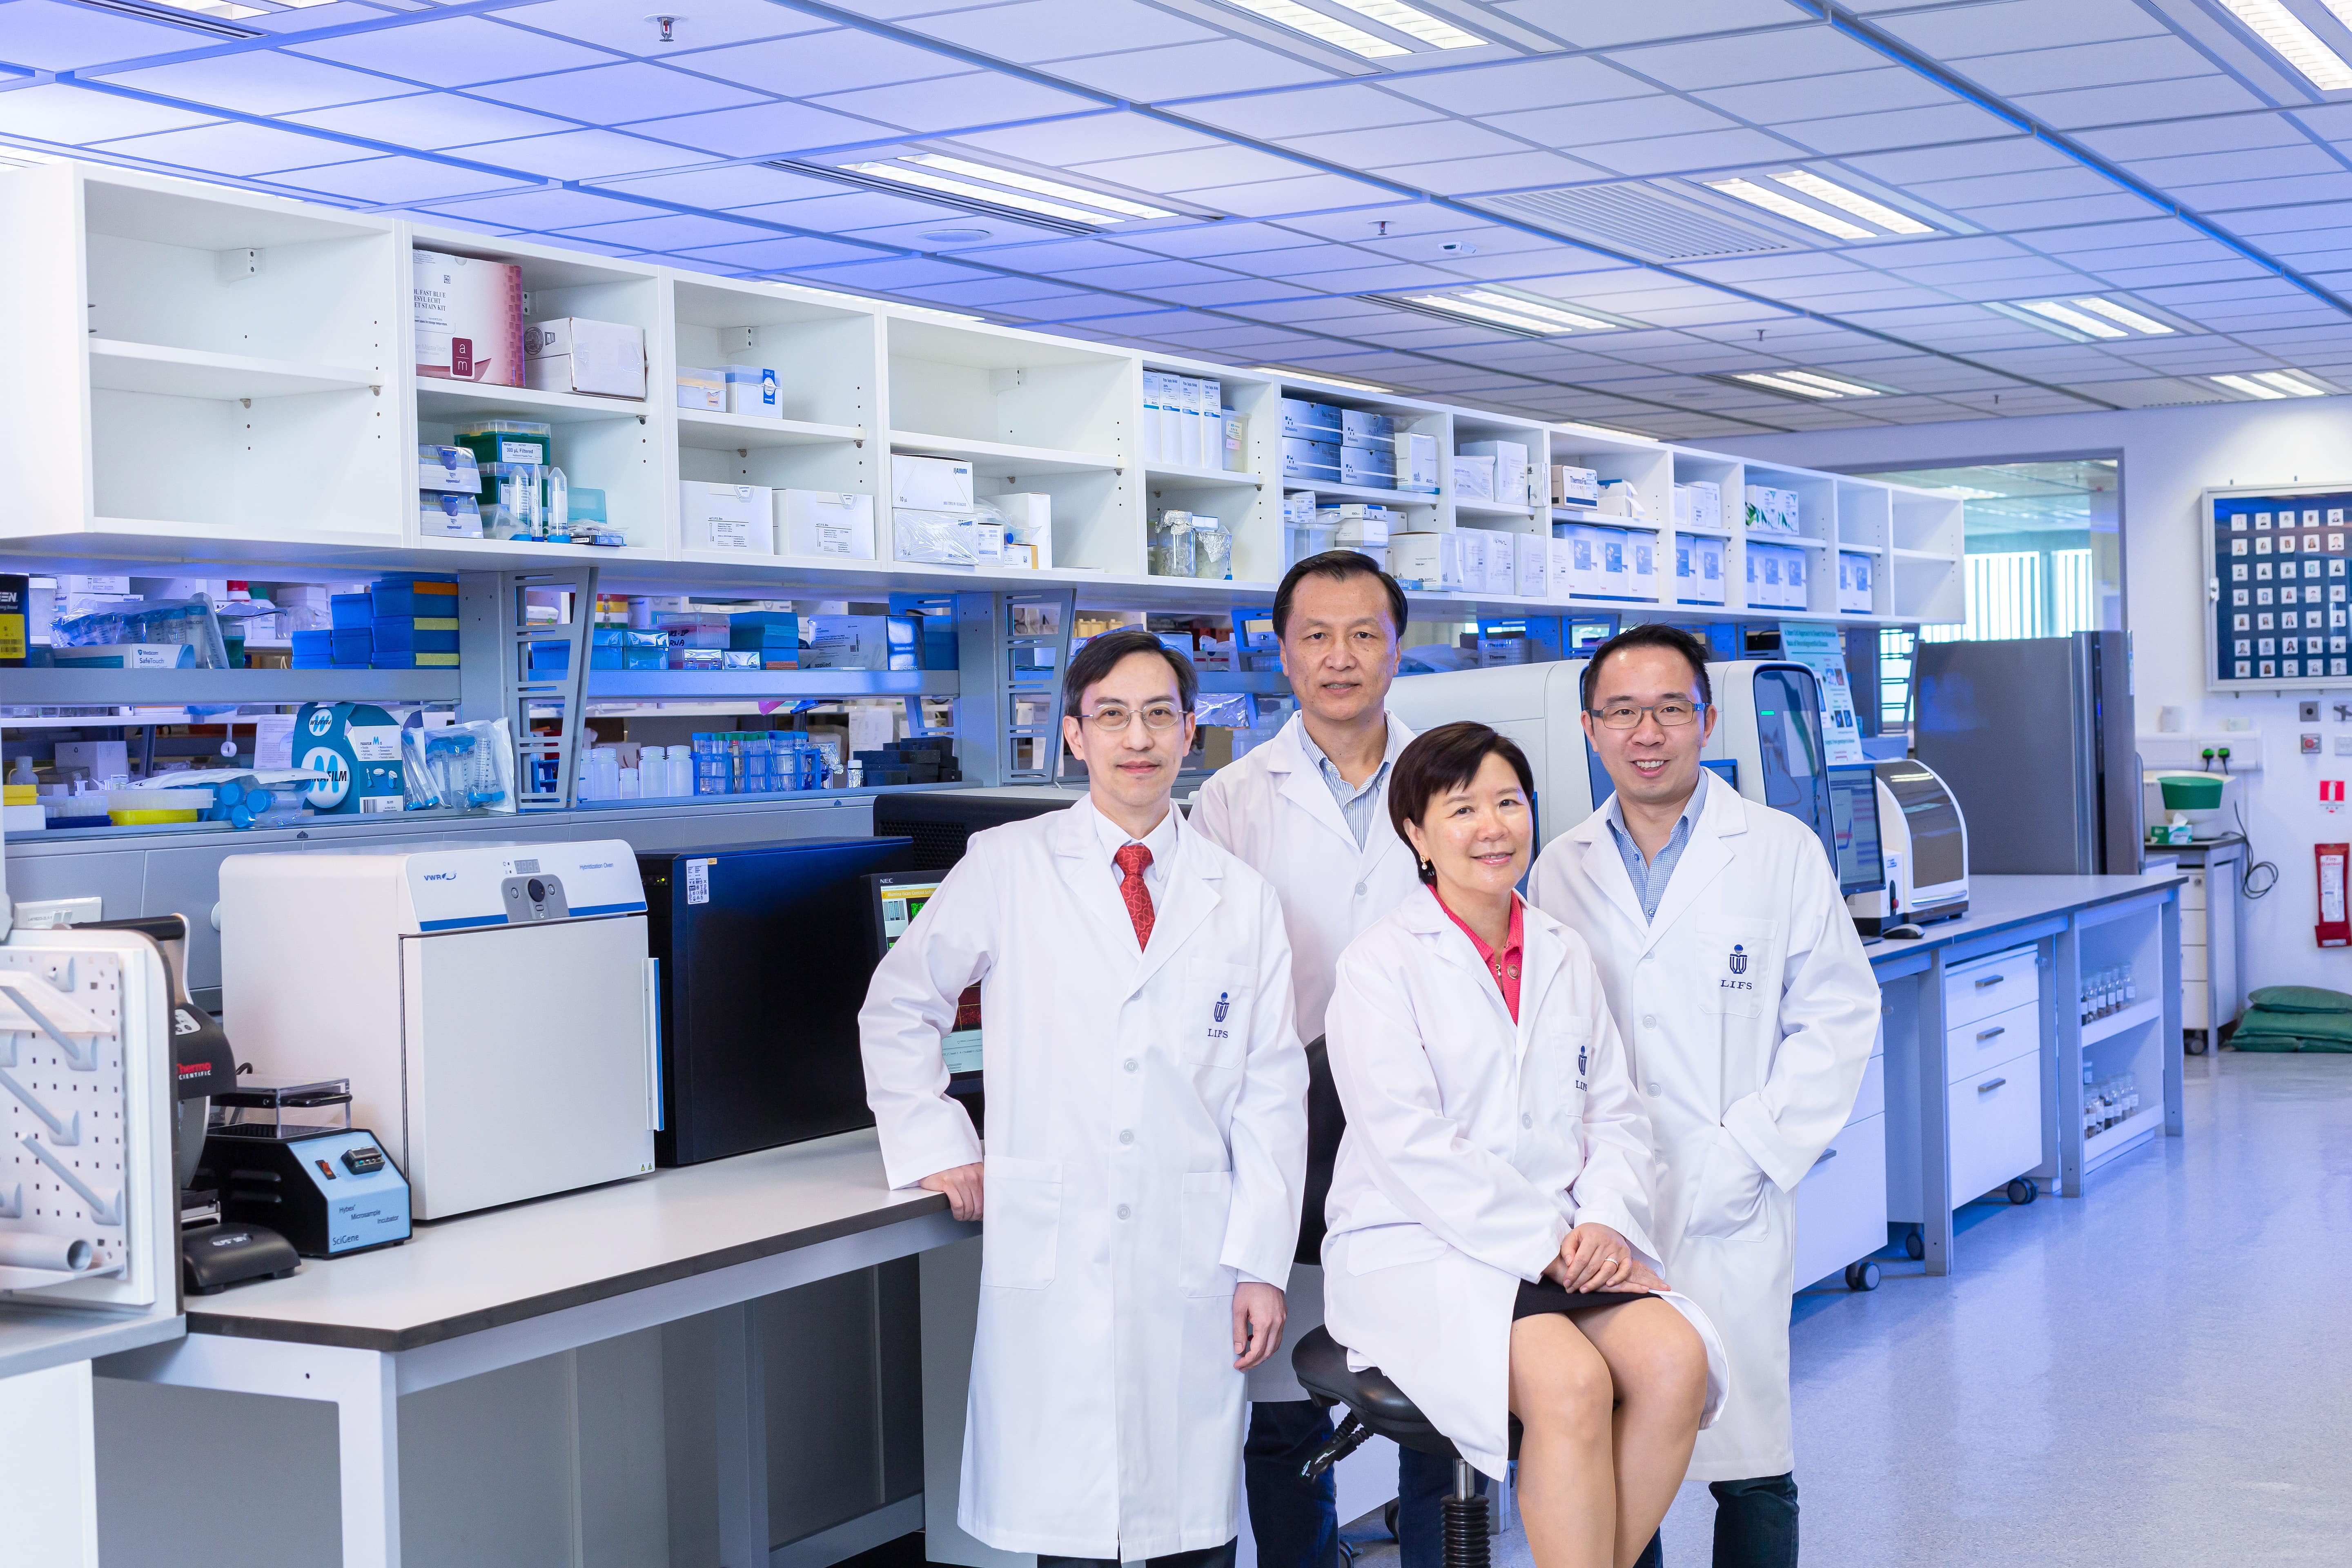 Led by prominent scientists from HKUST, HKCeND is aimed to establish a collaborative scientific hub for neurodegenerative disease research center in Hong Kong.